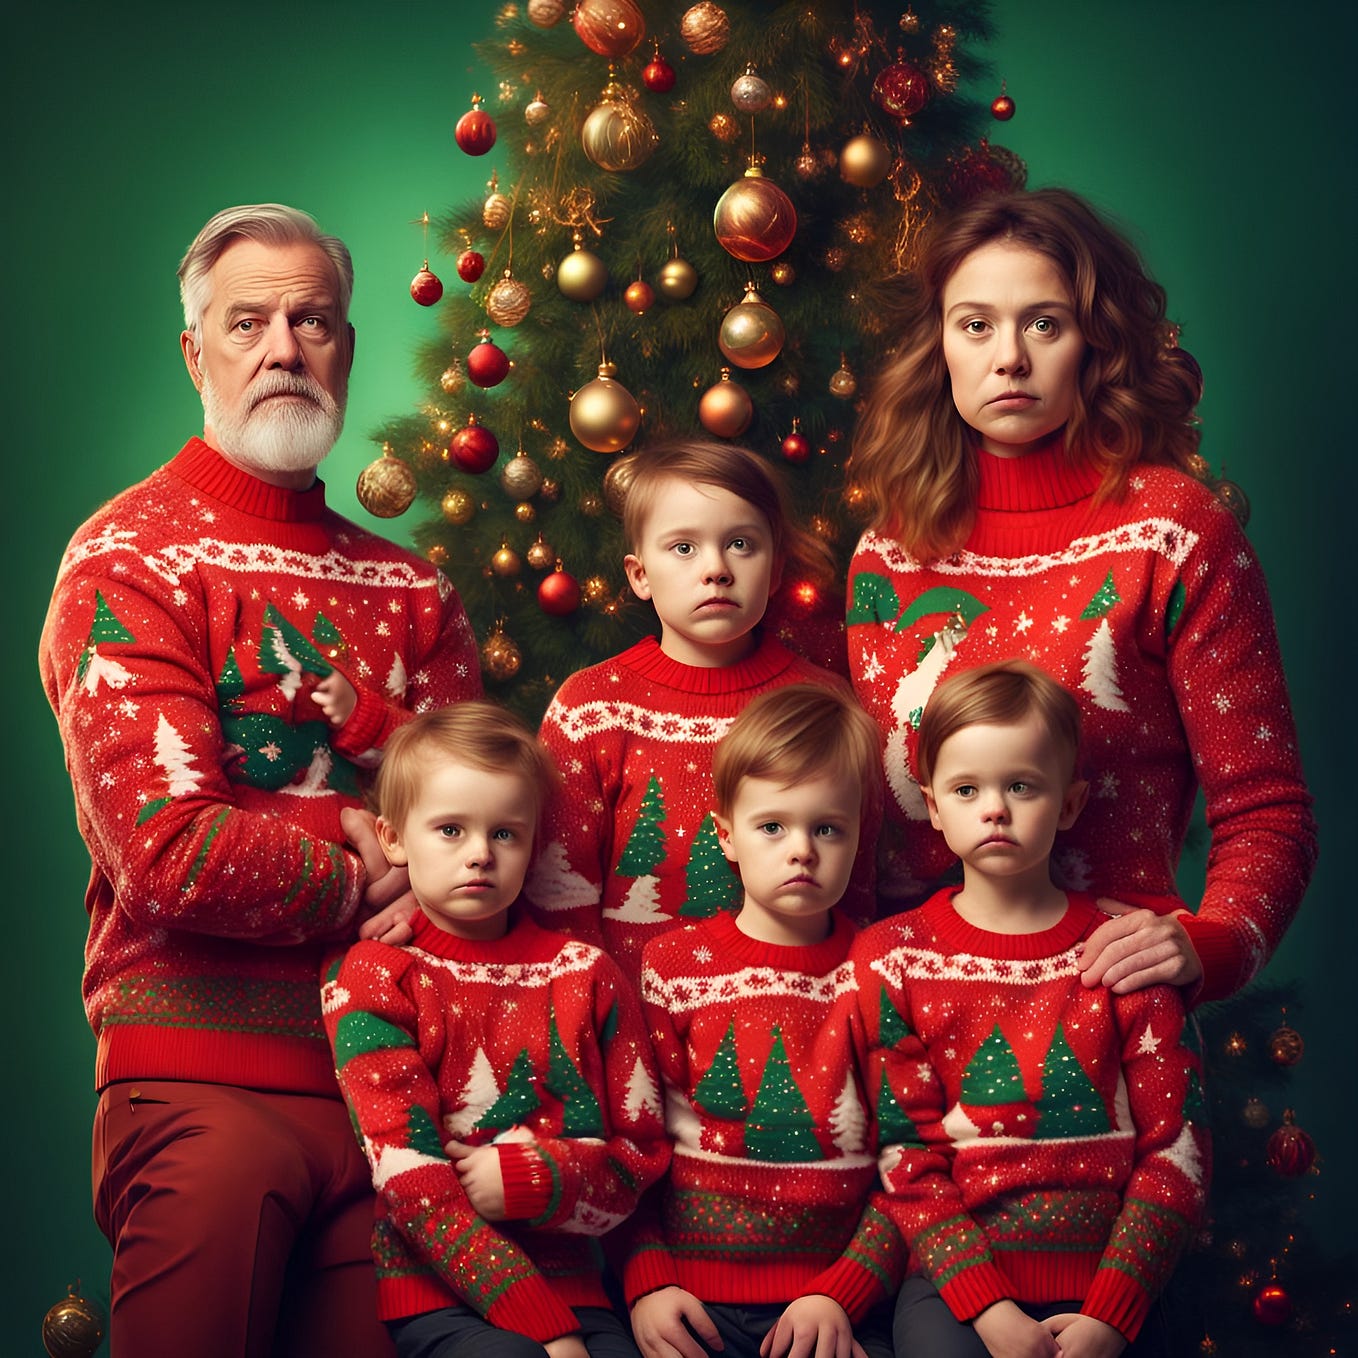 The Holiday Photo from Hell